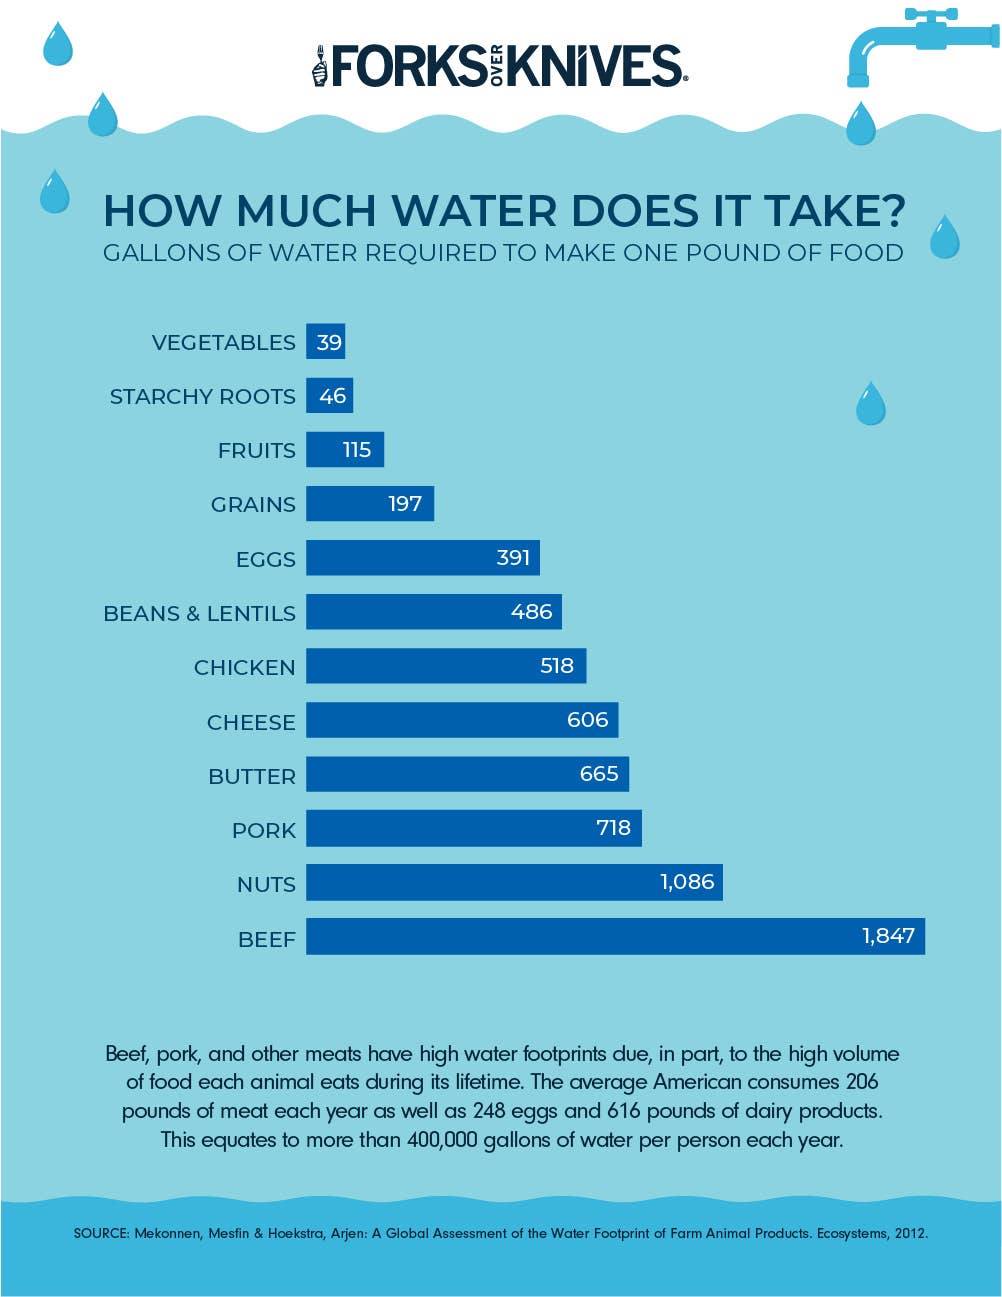 Bar graph showing how much water is used to produce different types of foods, with plant foods using the least and beef using the most